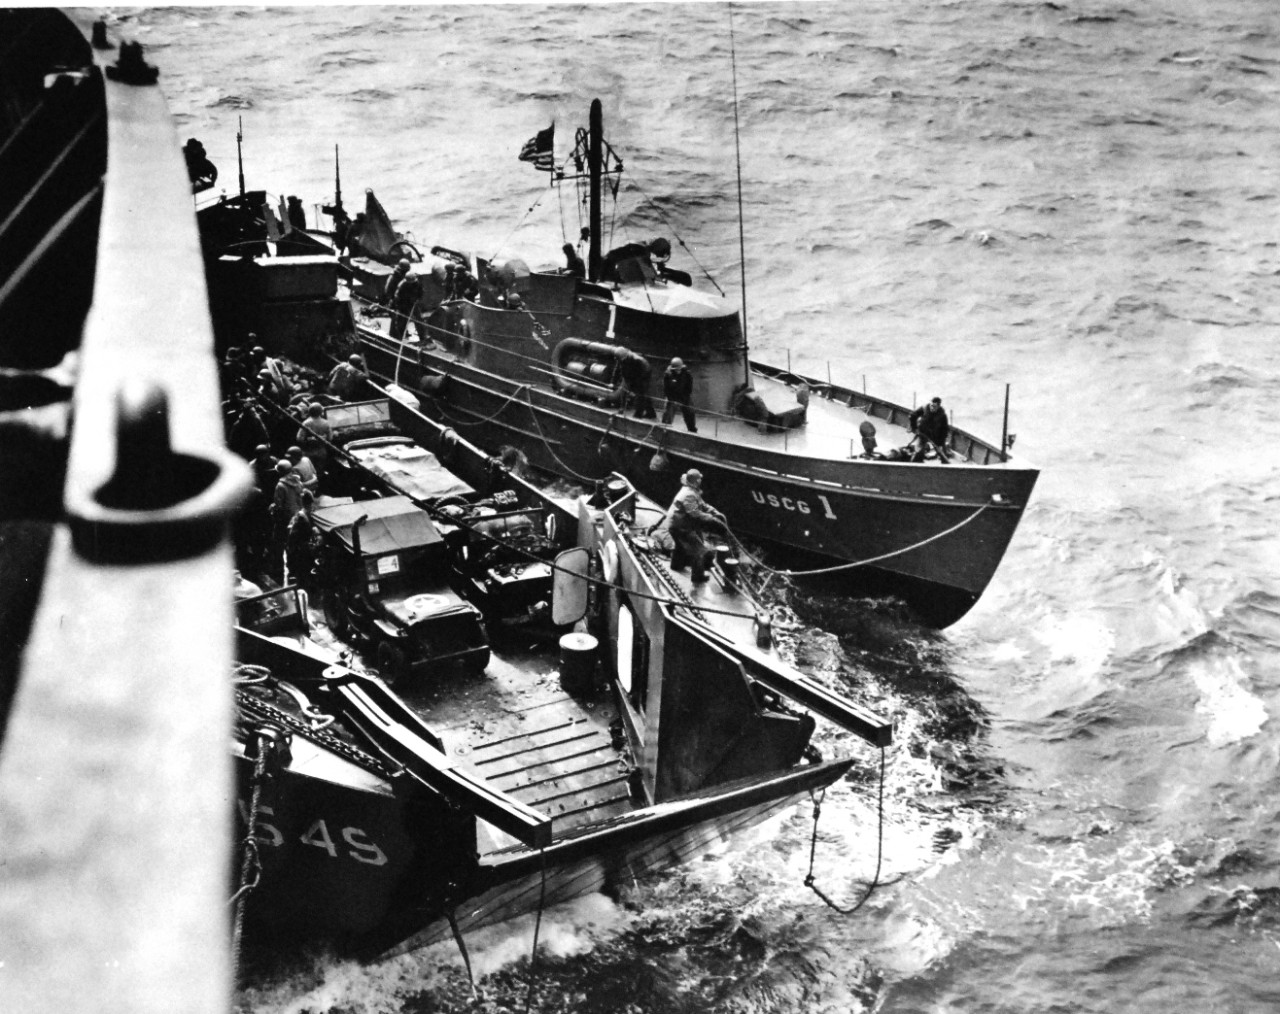 26-G-06-10-44-1:  Normandy Invasion, June 1944.  Sub Busters in Invasion Role.  The U.S. Coast Guard’s famous 83 footers, sub-busters in the Battle of the Atlantic, and to their laurels as rescue craft in the D-Day sweep across the English Channel to the French Coast.  These swift, little, intrepid craft are the Coast Guard boats that have been mentioned over and over again in radio and news dispatches for their gallant rescue role during the initial smash on France, June 1944.  Official U.S. Coast Guard Photograph, now in the collections of the National Archives.   (2015/5/19).  